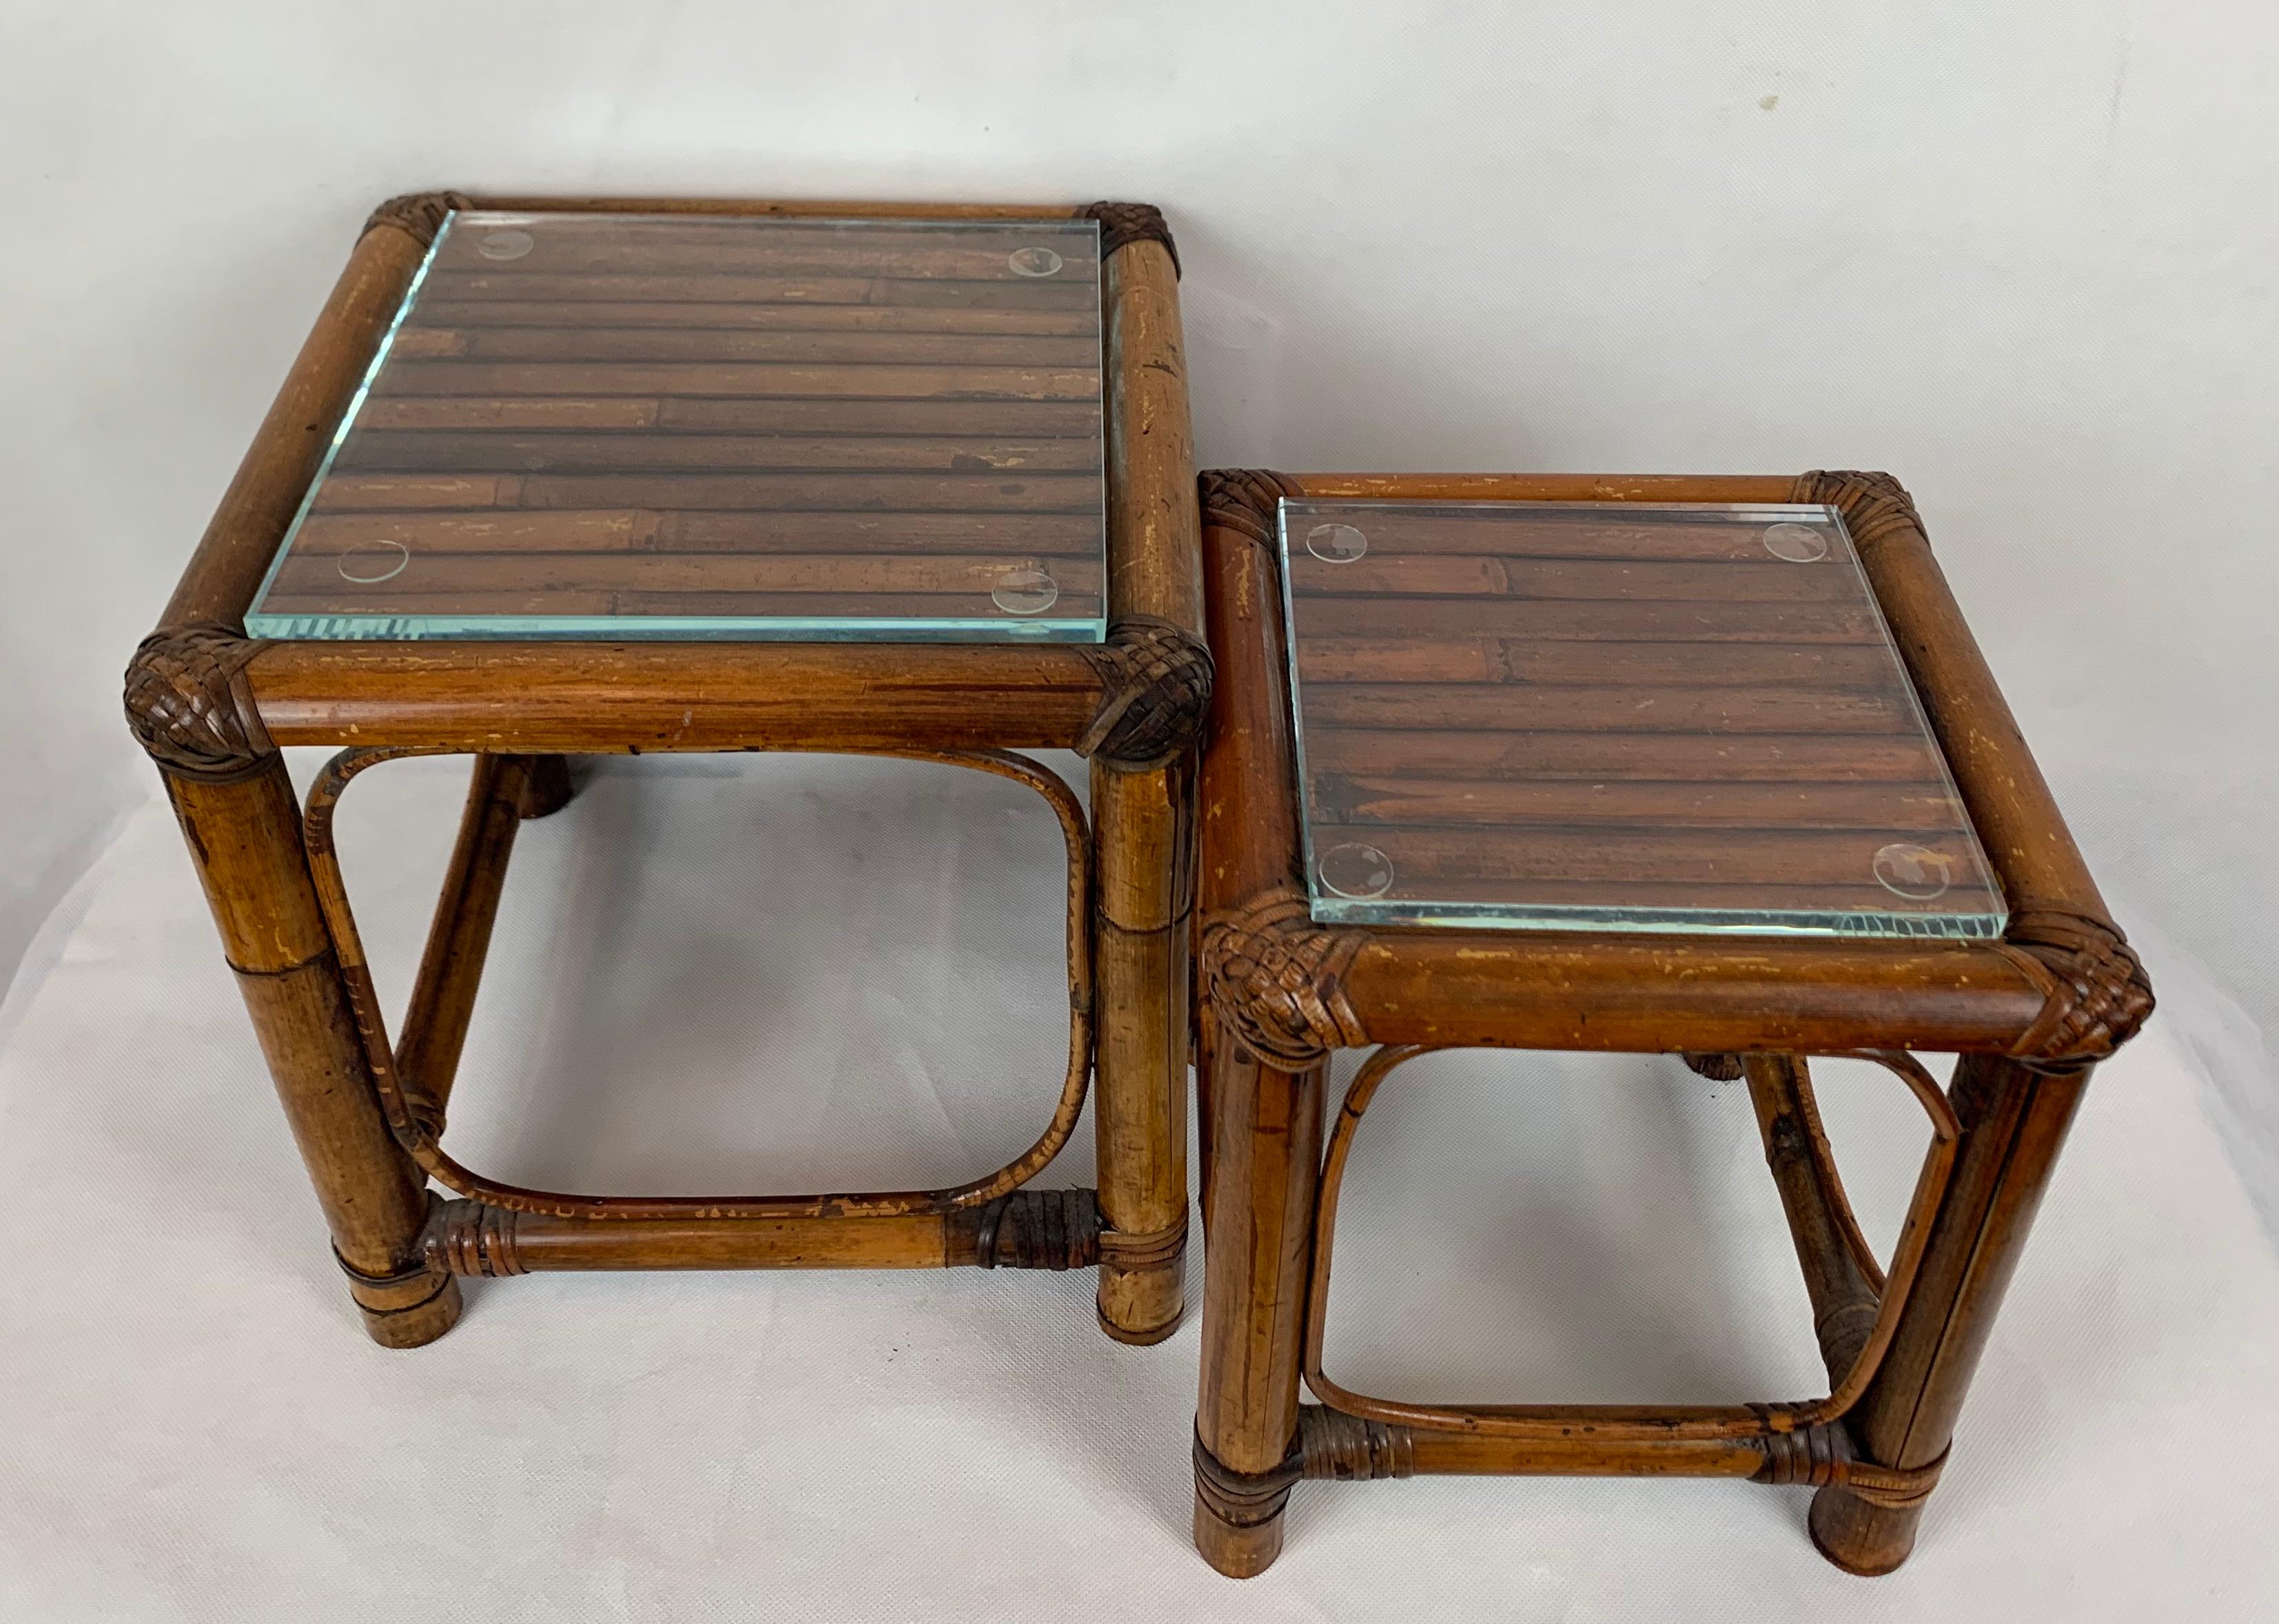 Chinese Set of Two Stacking Bamboo Tables with Added Beveled Glass Tops